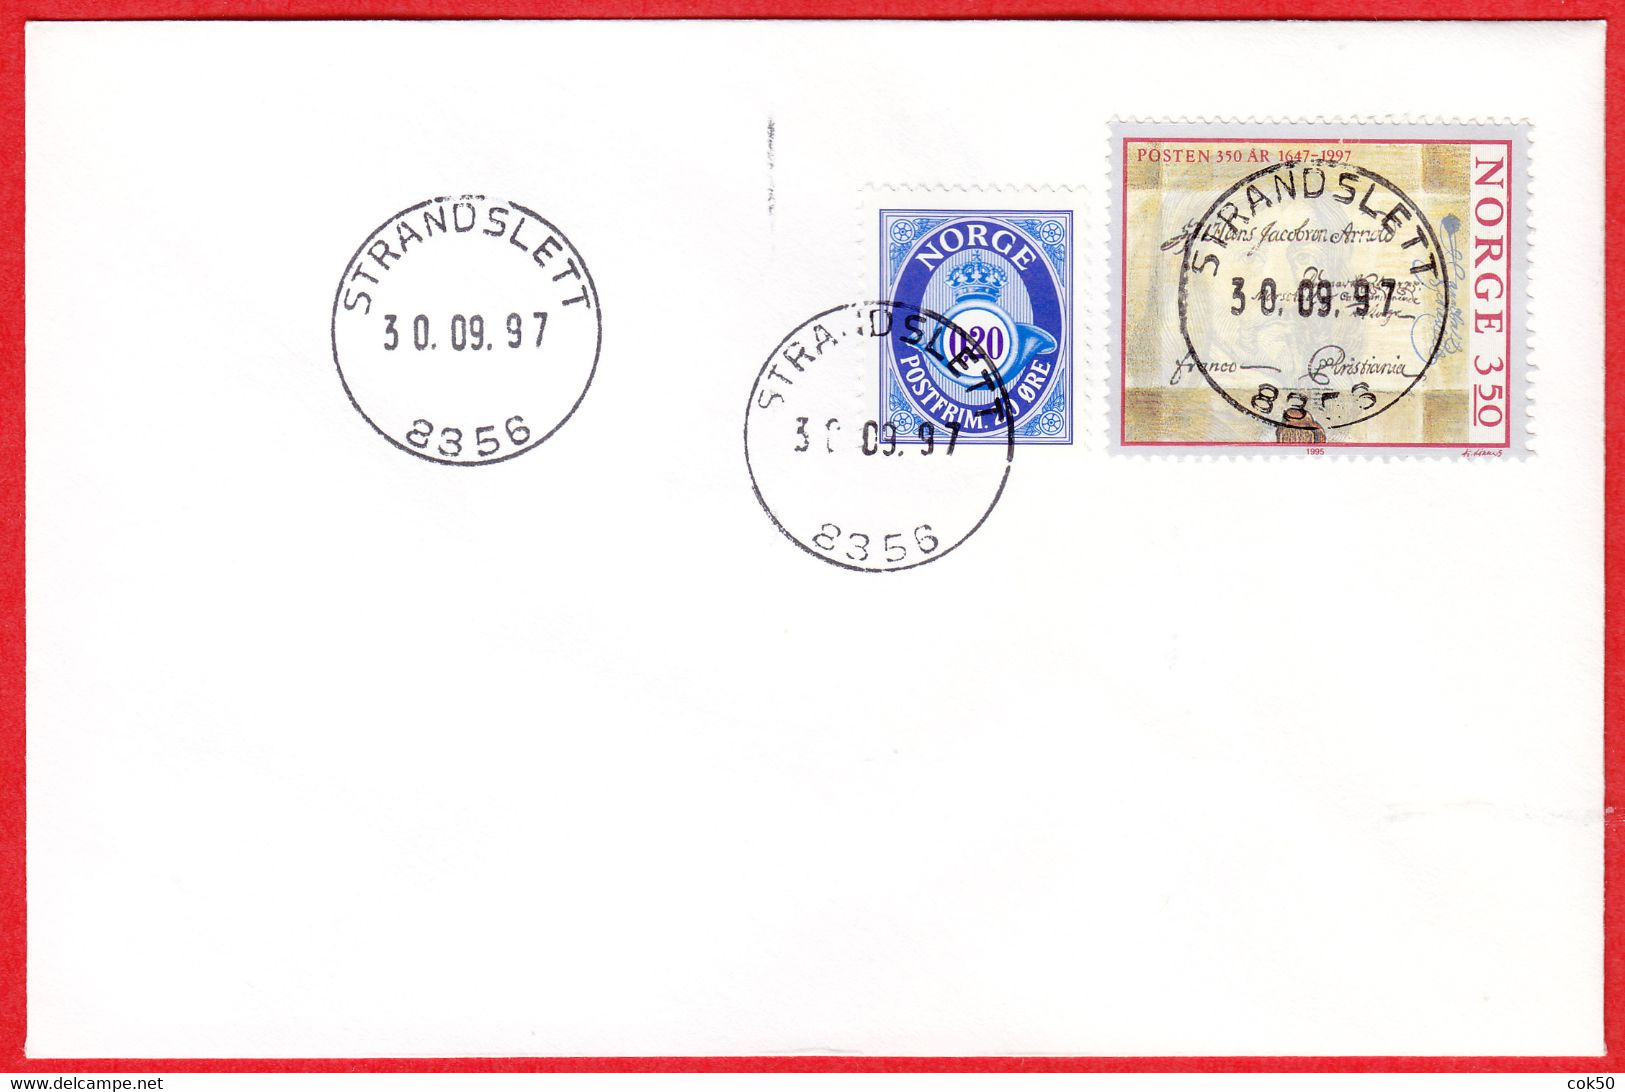 NORWAY -  8356 STRANDSLETT - 24 MmØ - (Nordland County) - Last Day/postoffice Closed On 1997.09.30 - Emisiones Locales